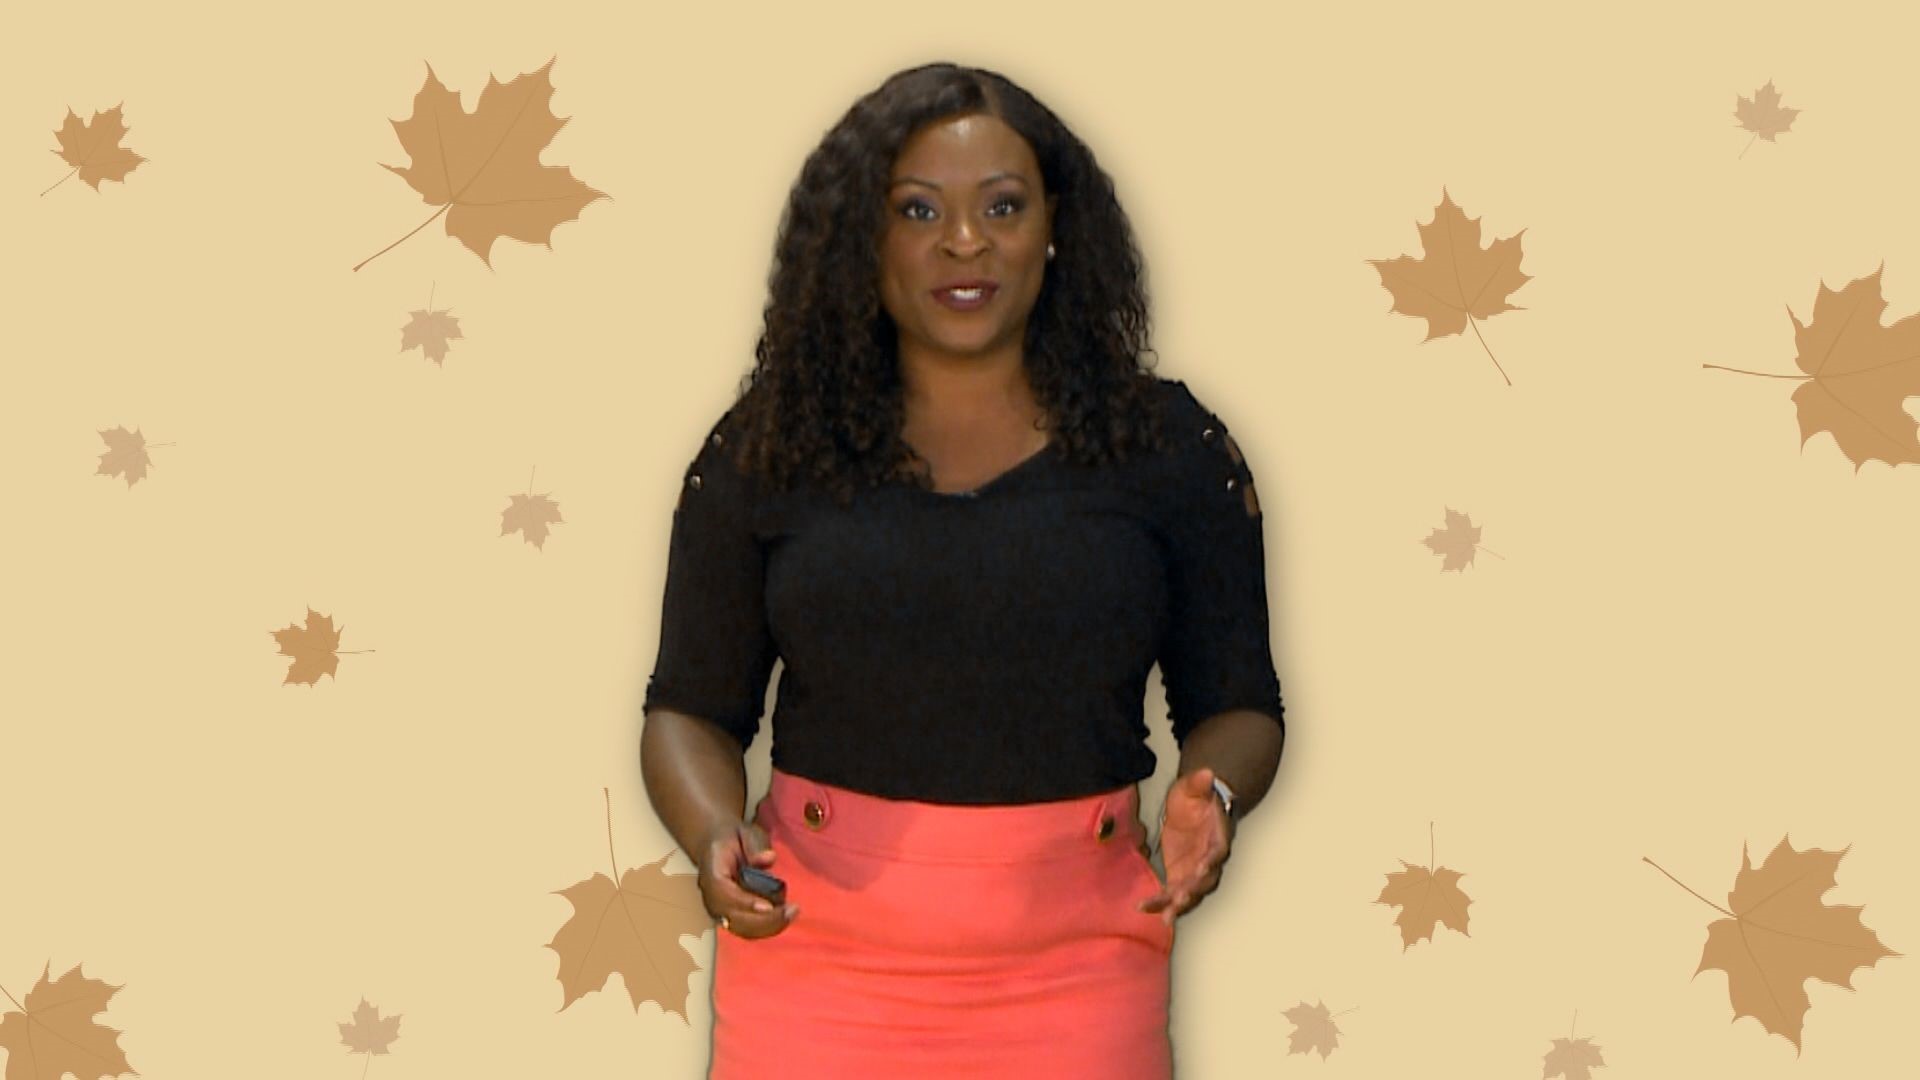 Break out the boots and pour up the pumpkin spice, Lauren Coleman is ready for fall!